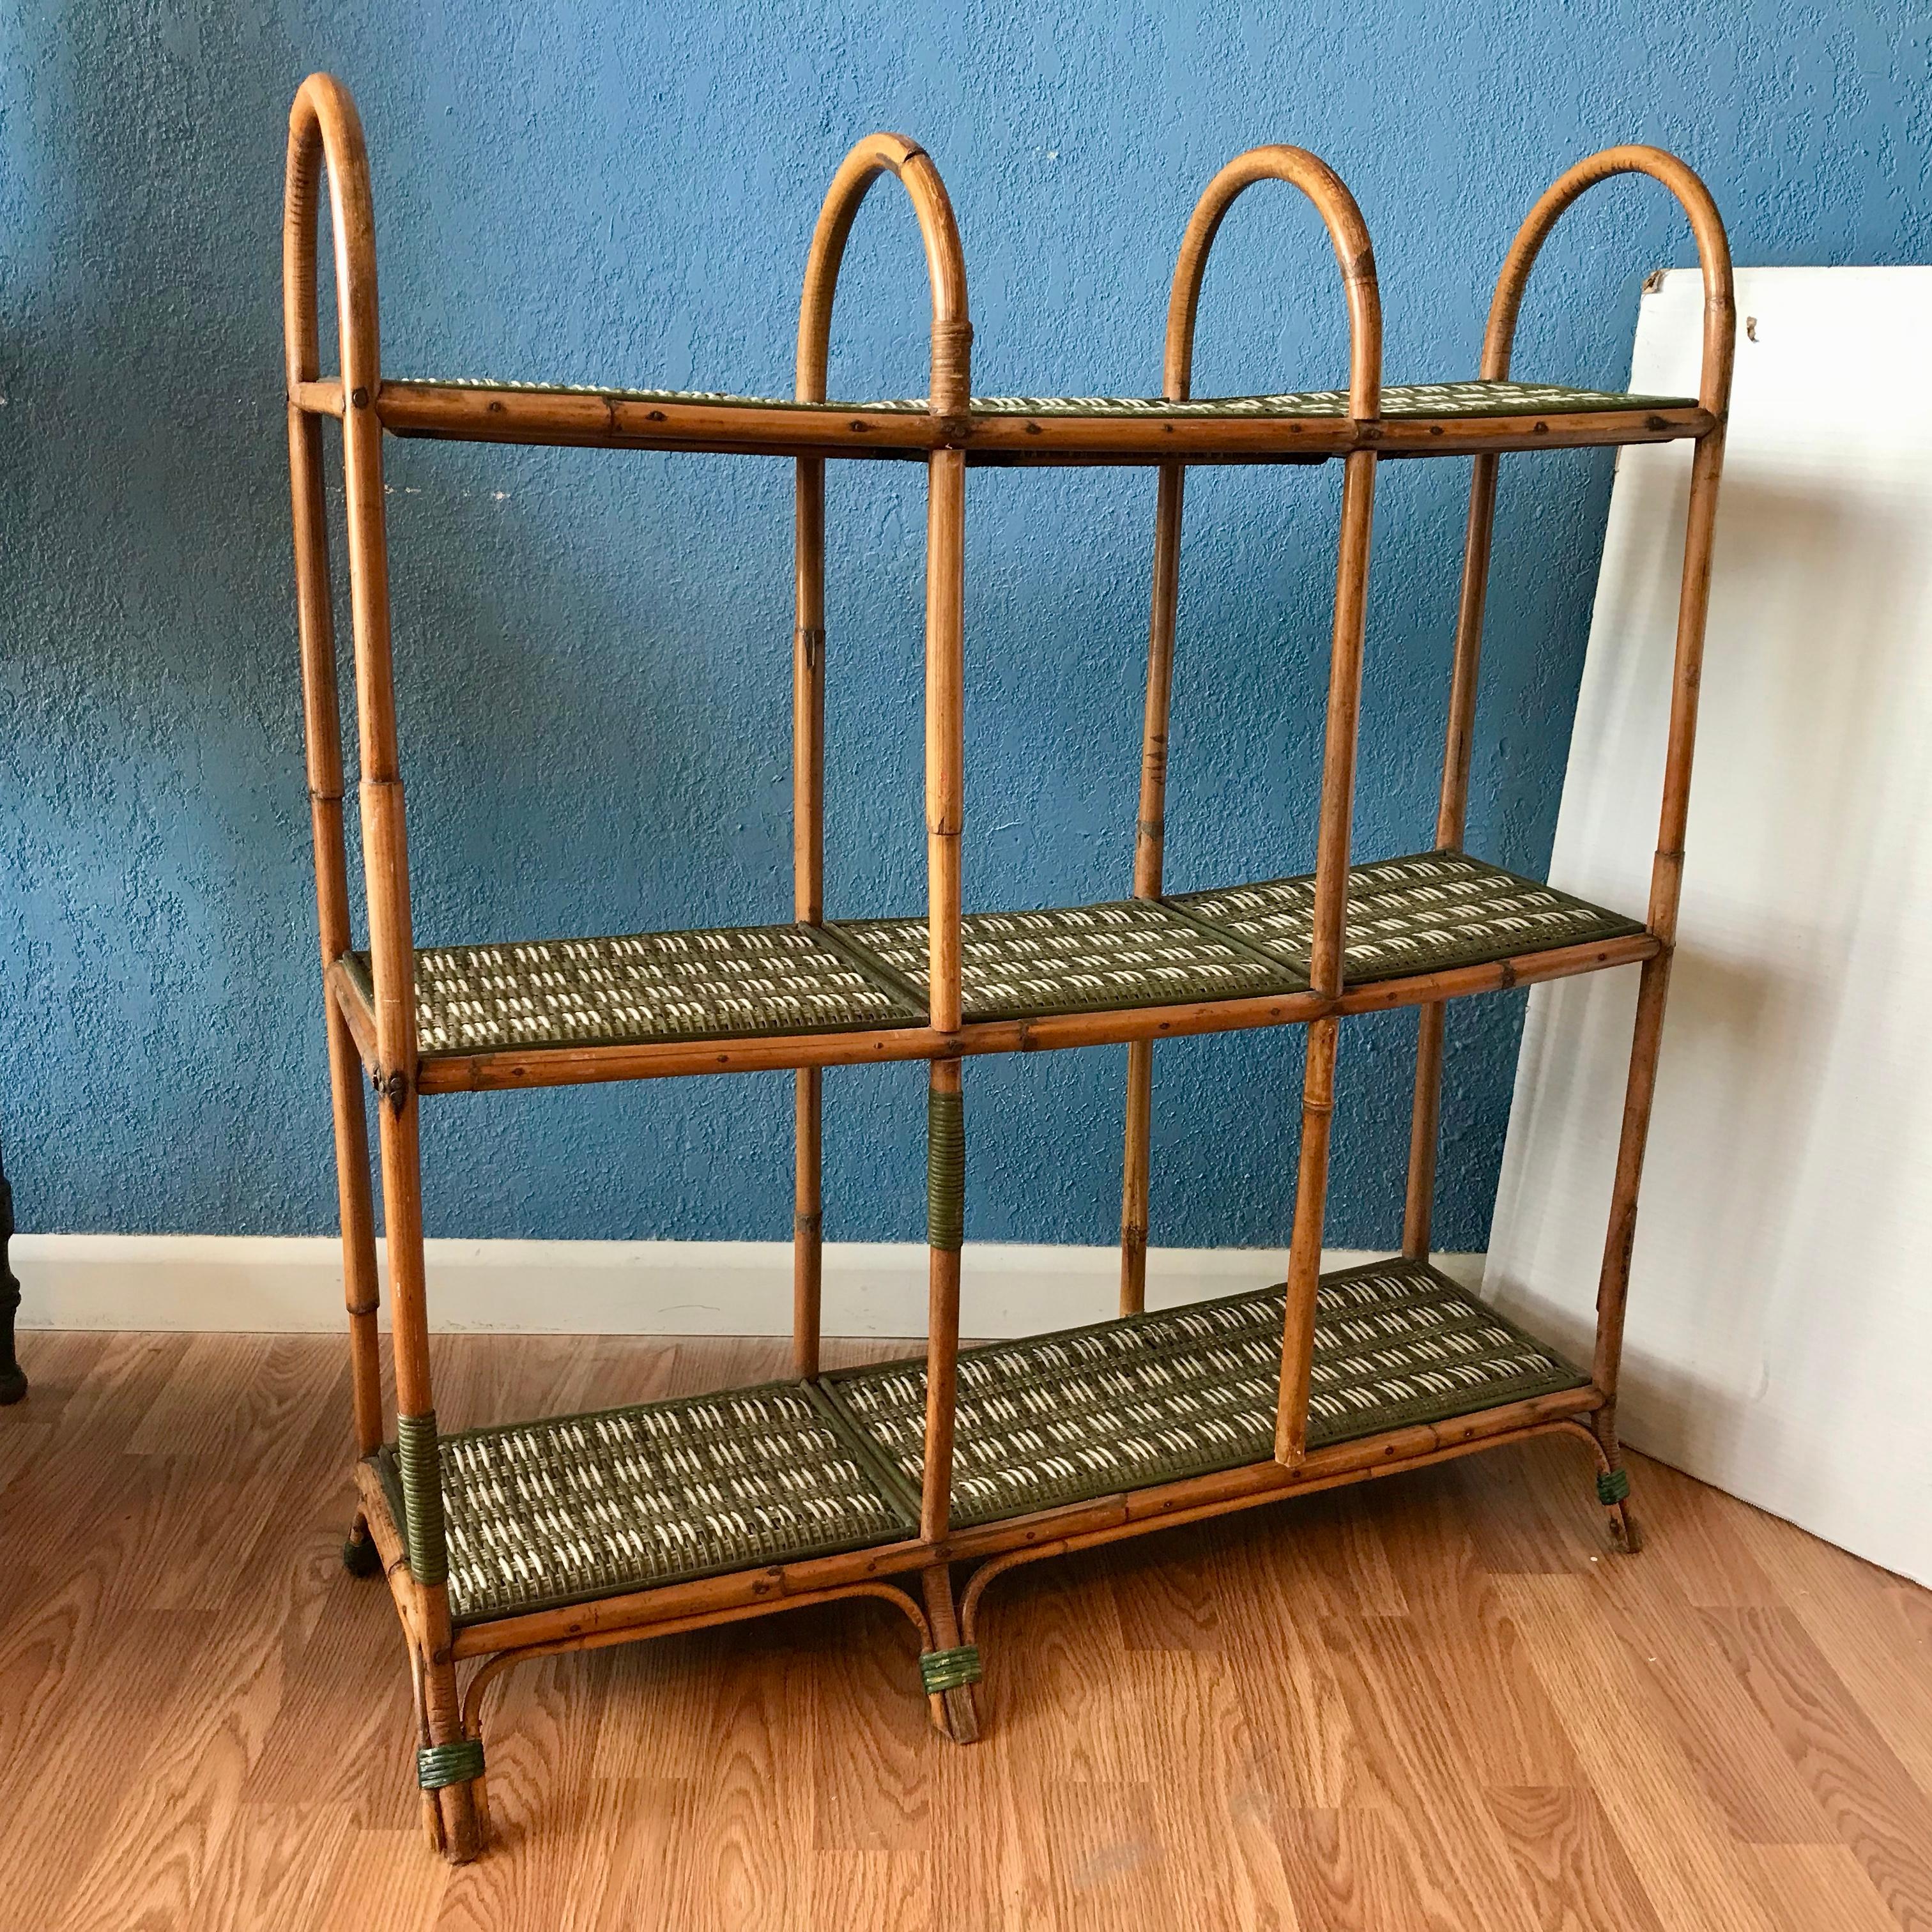 An unusual wicker and rattan form.
May be used as a book stand or 
display piece.